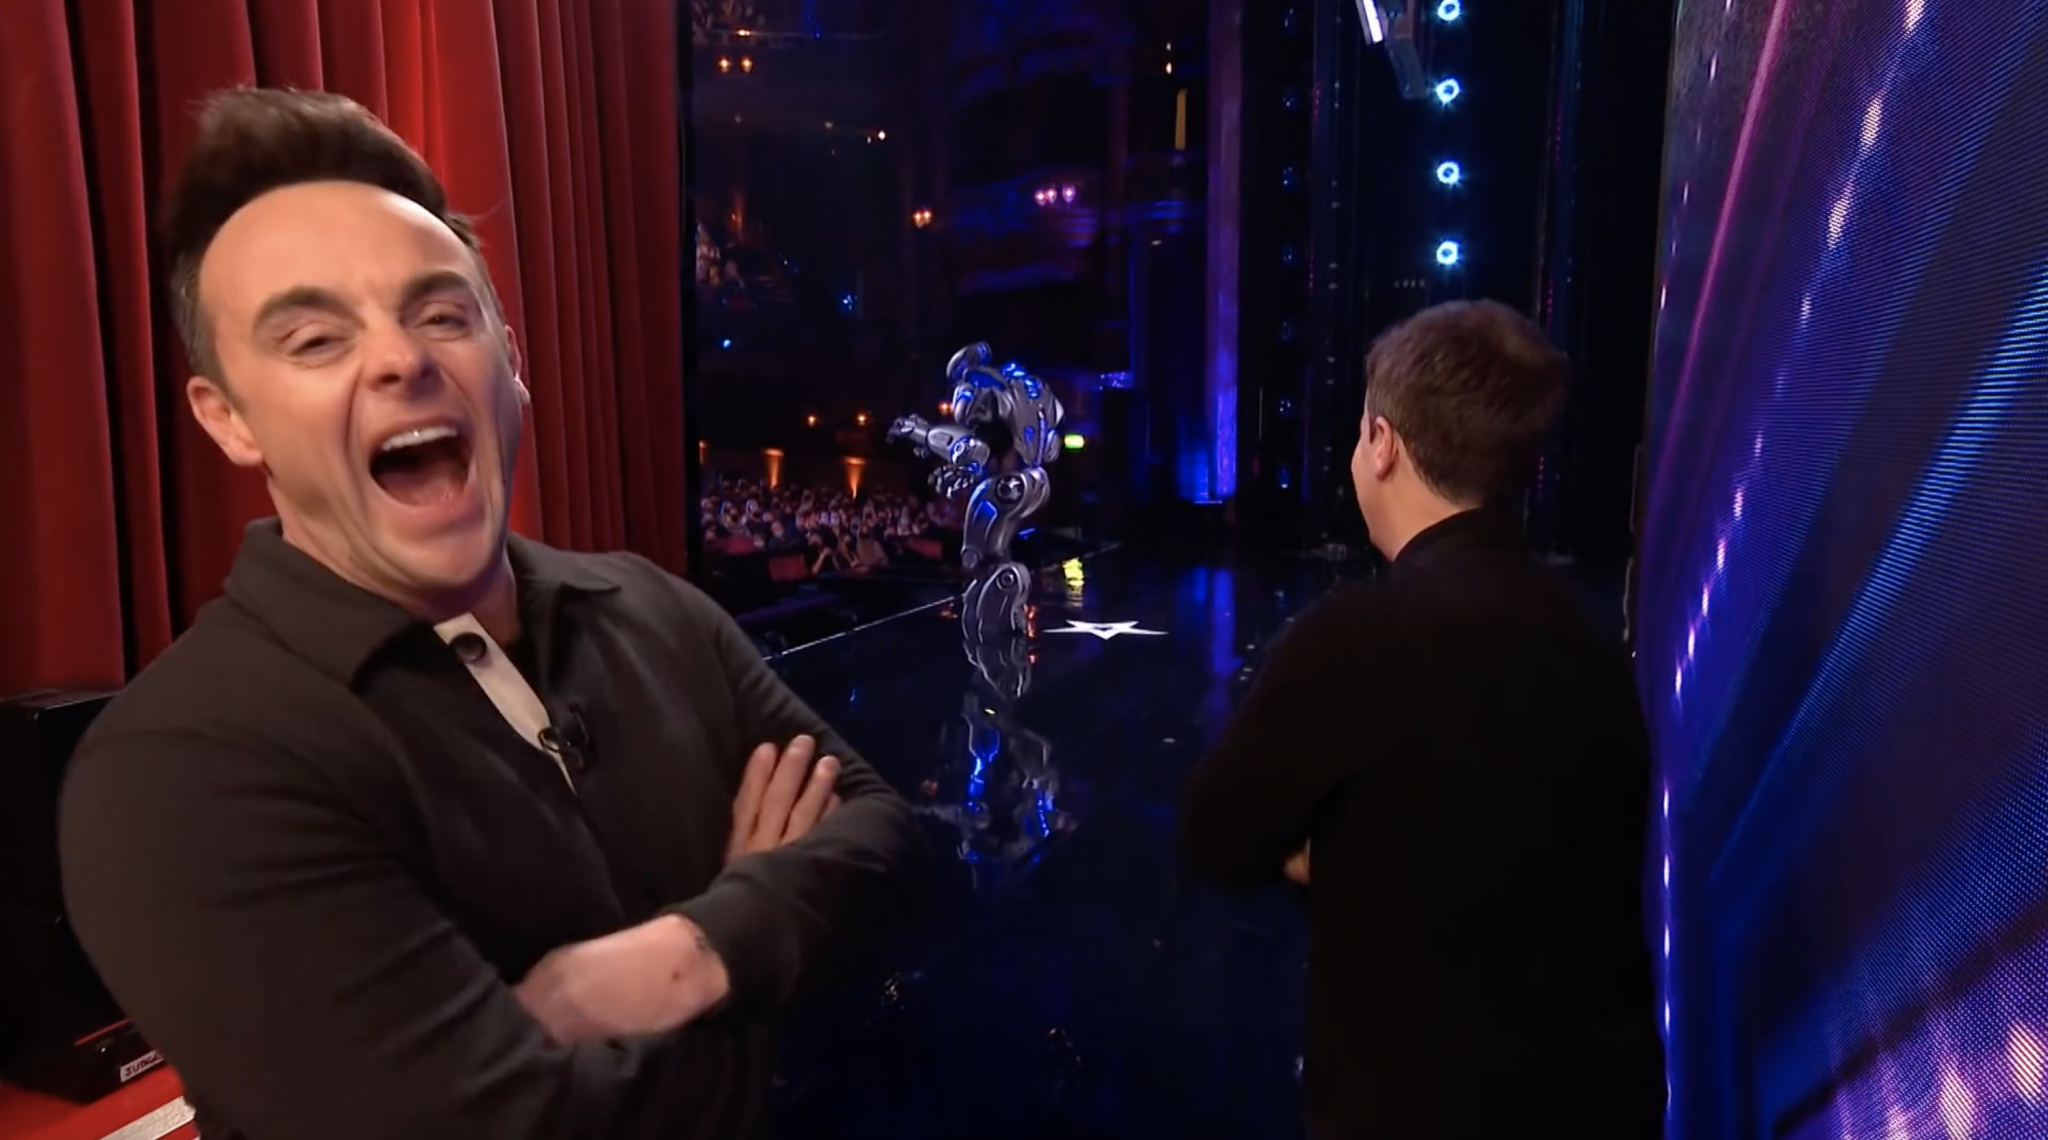 Ant & Dec laughing at Titan the Robot during his Britain's Got Talent audition at the London Palladium. #BGT